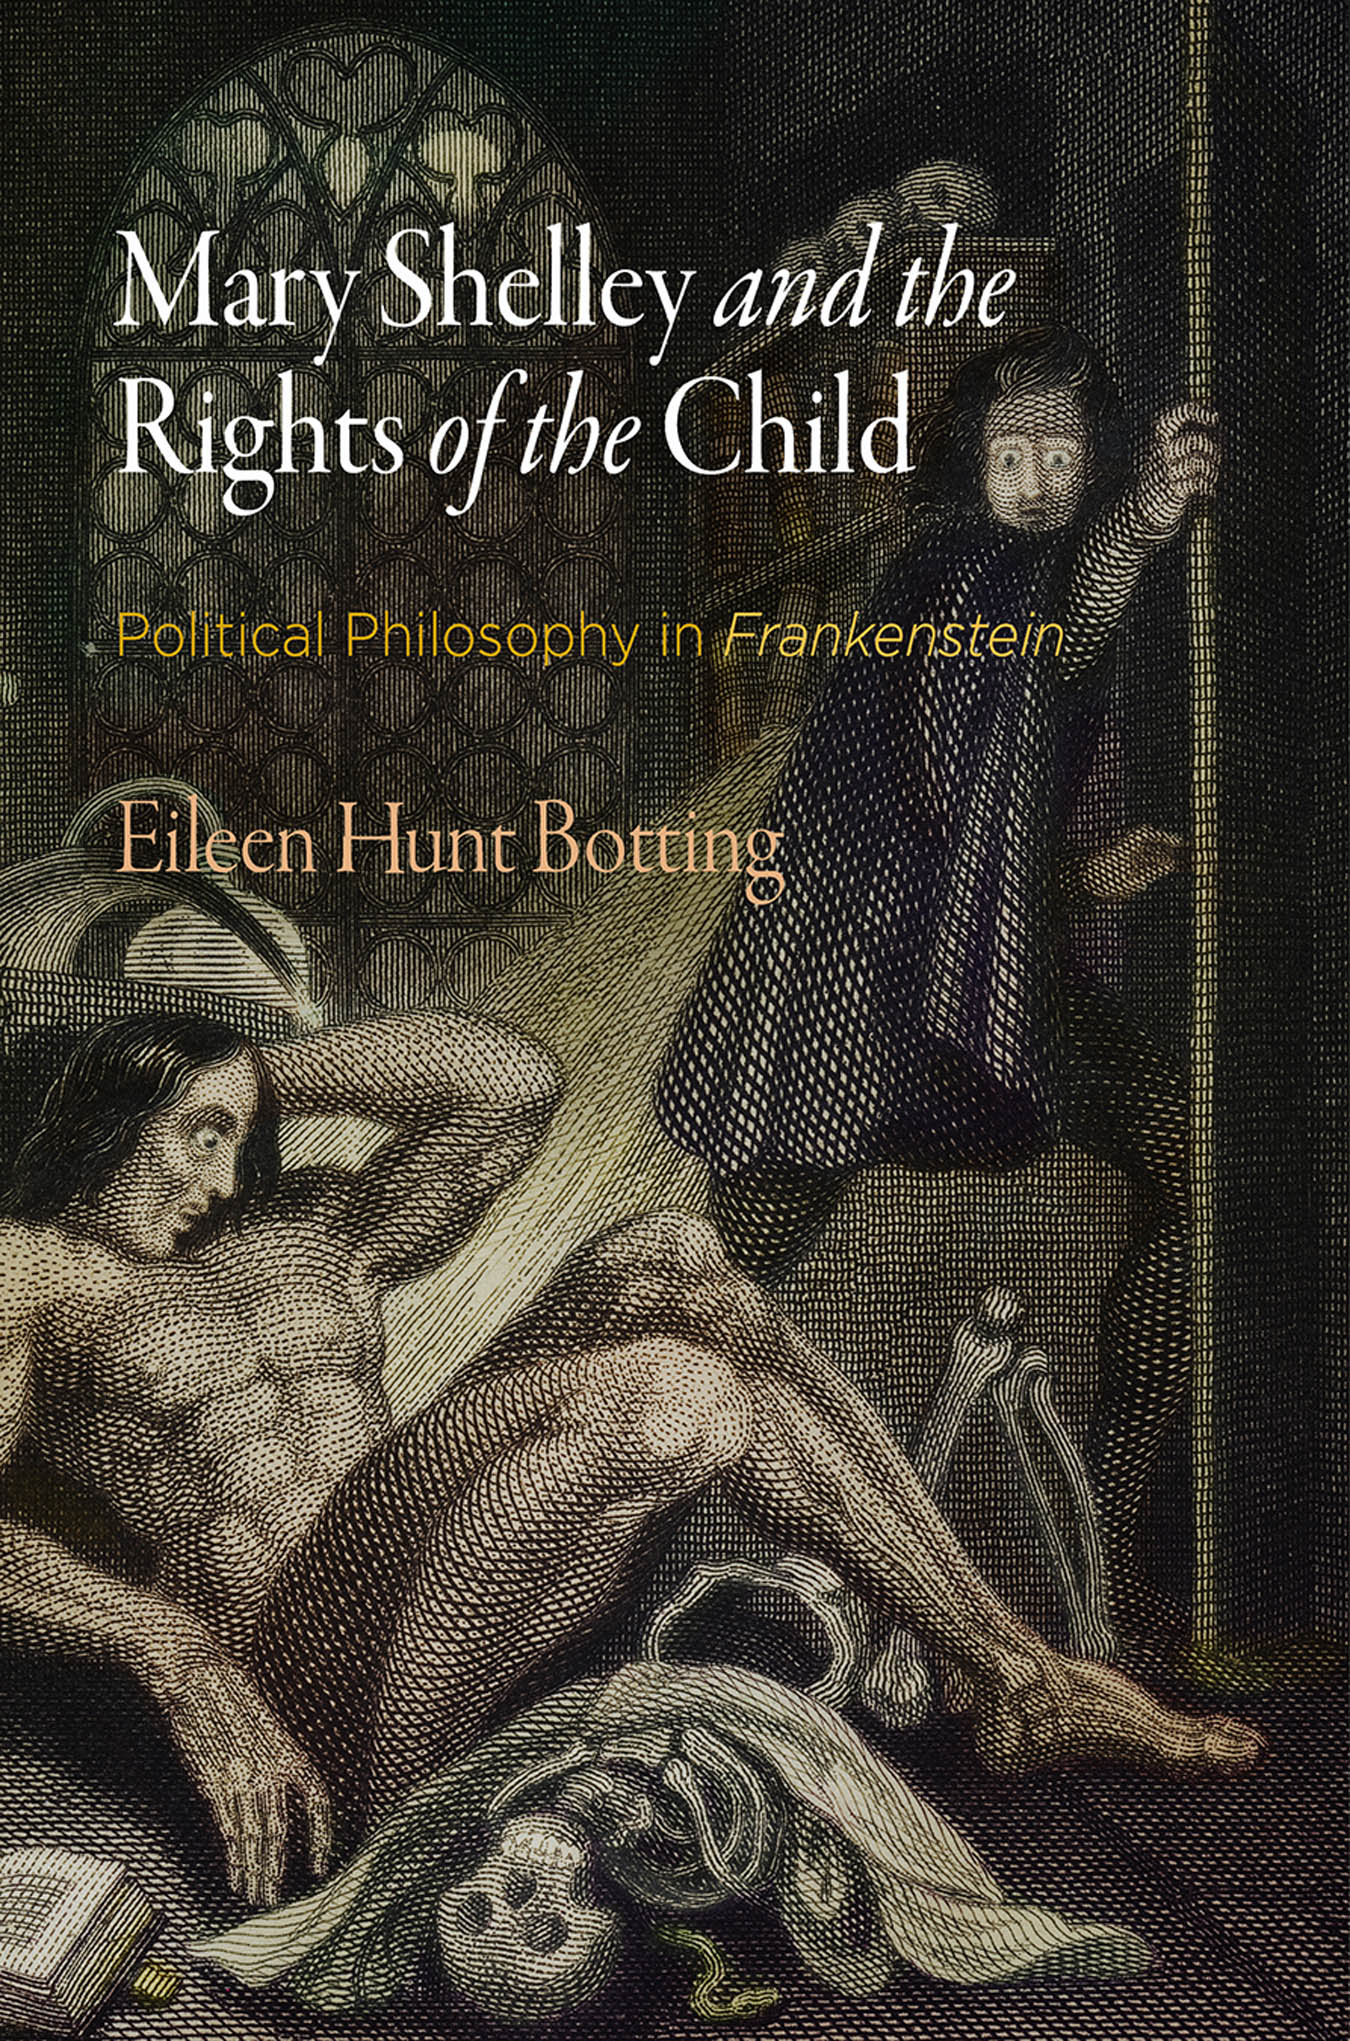 Mary Shelley and the Rights of the Child: Political Philosophy in "Frankenstein"